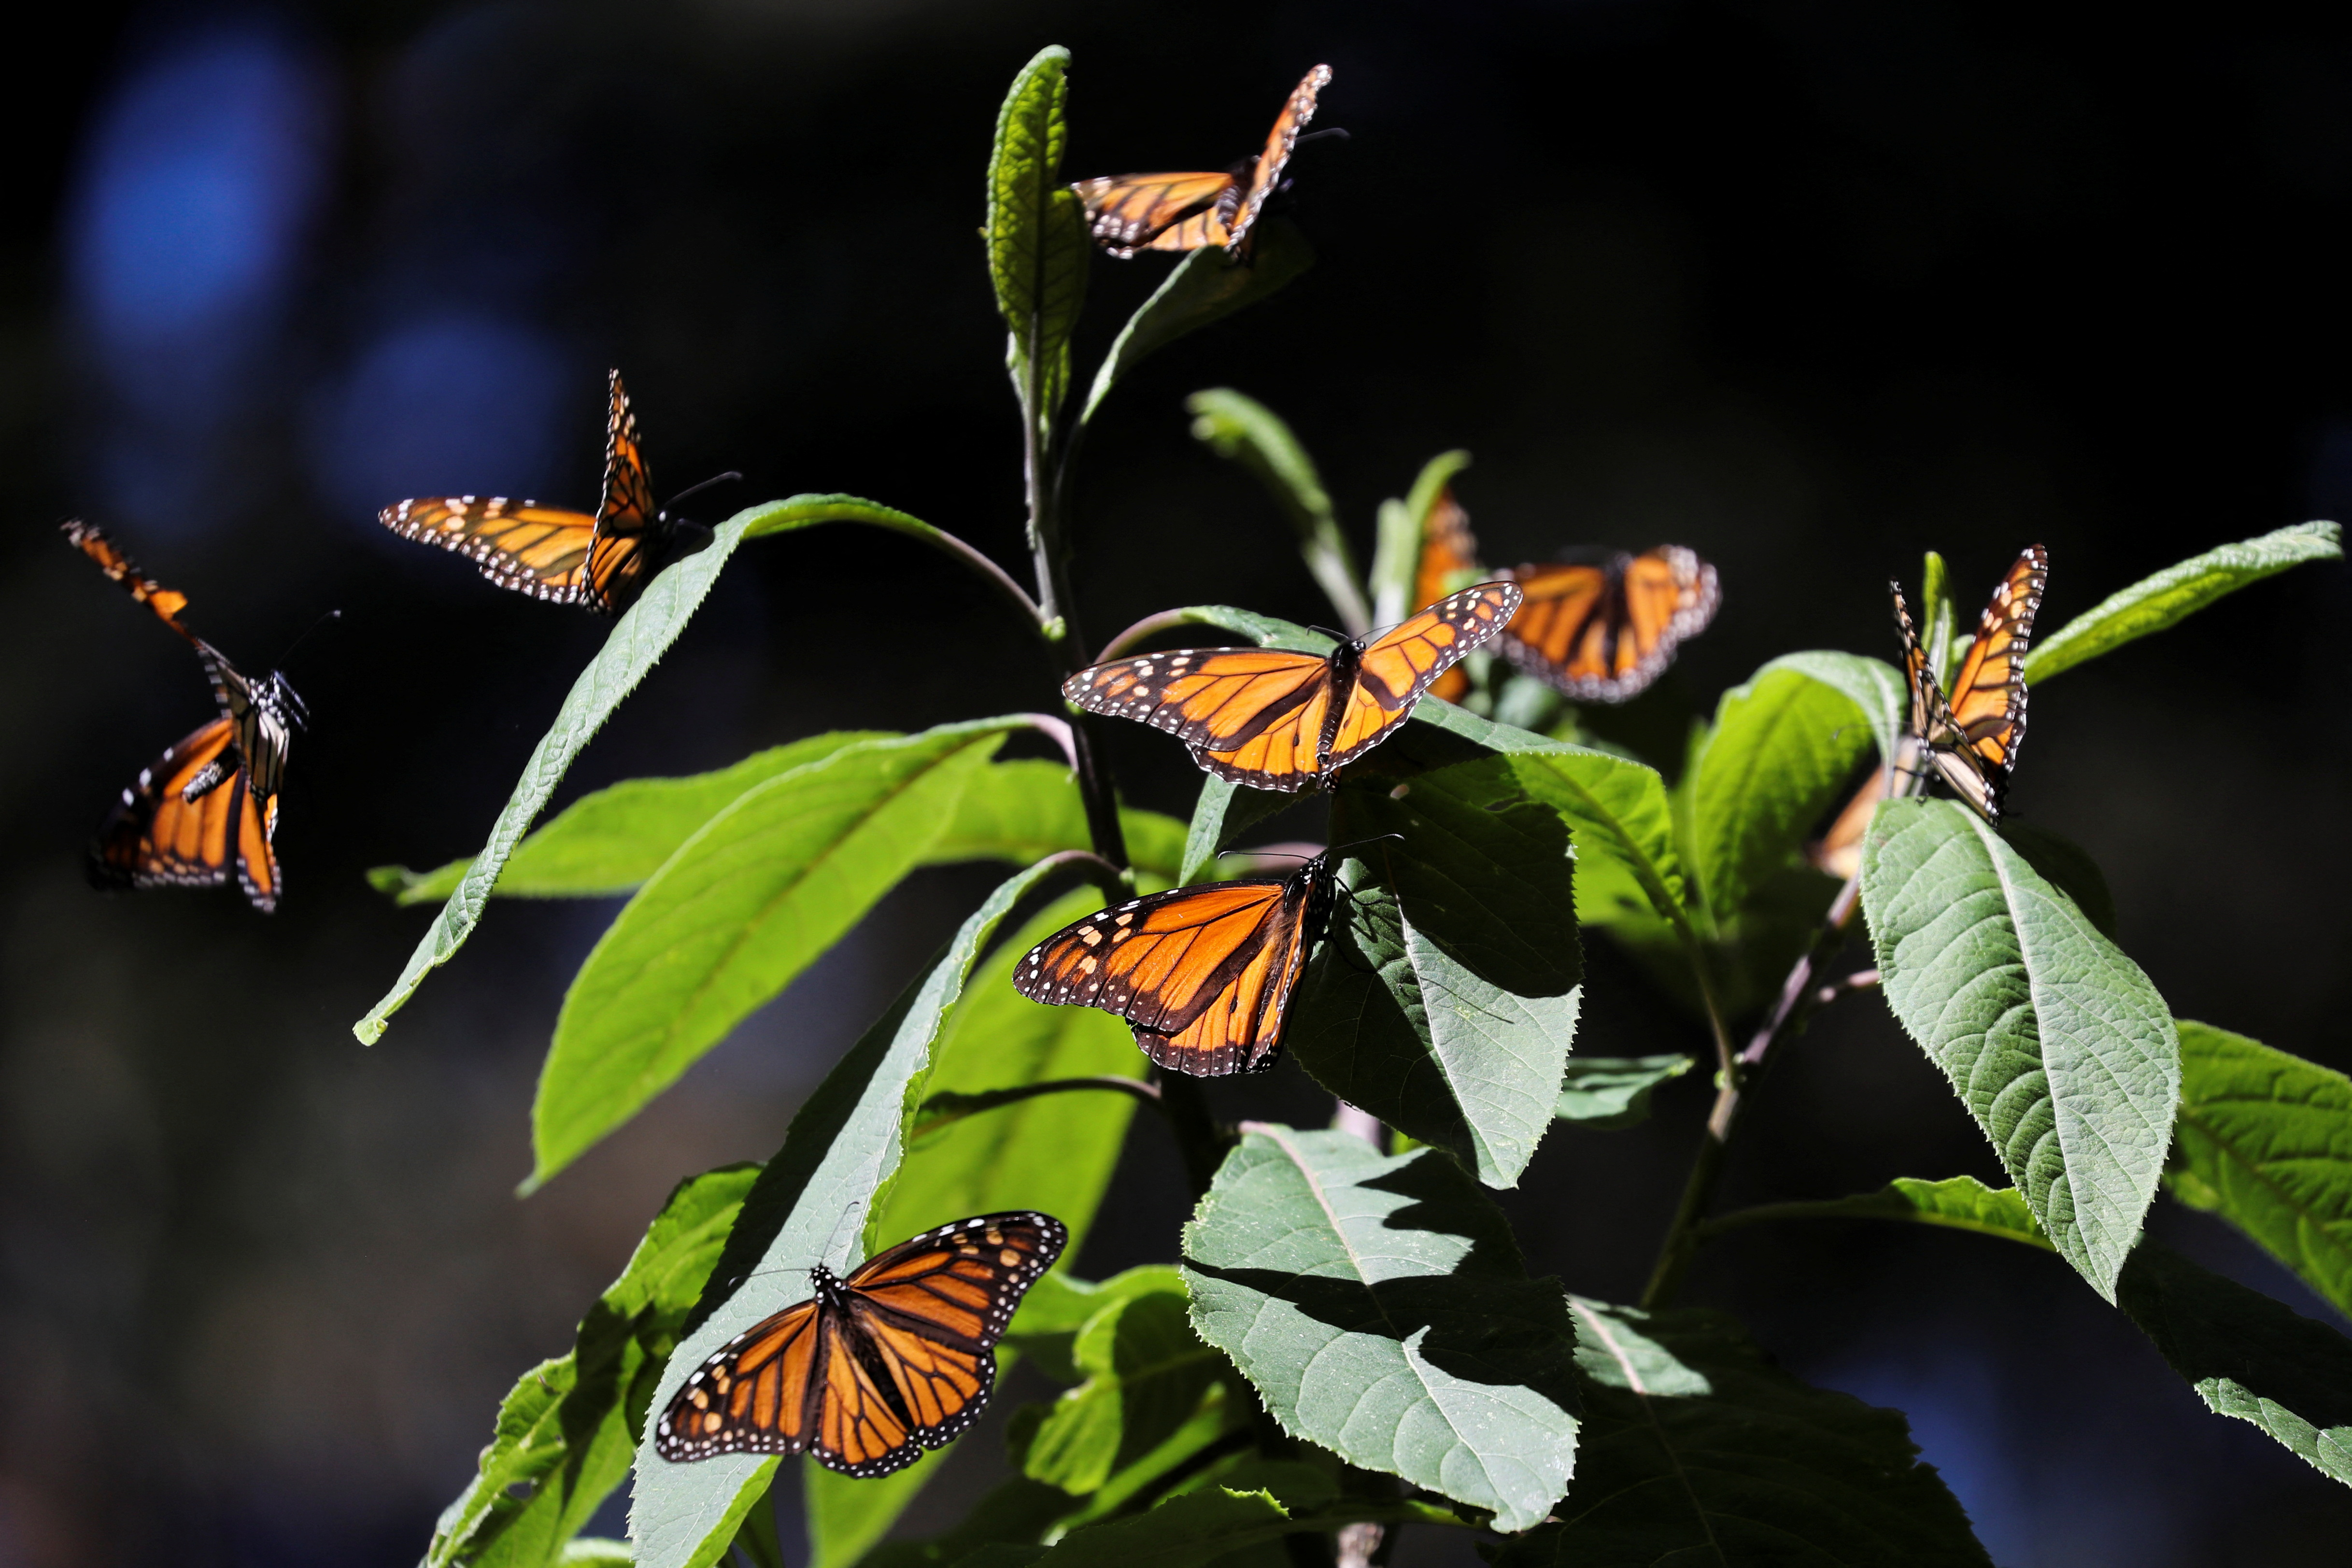 The Monarch Butterfly Beats Extinction in Triumphant California